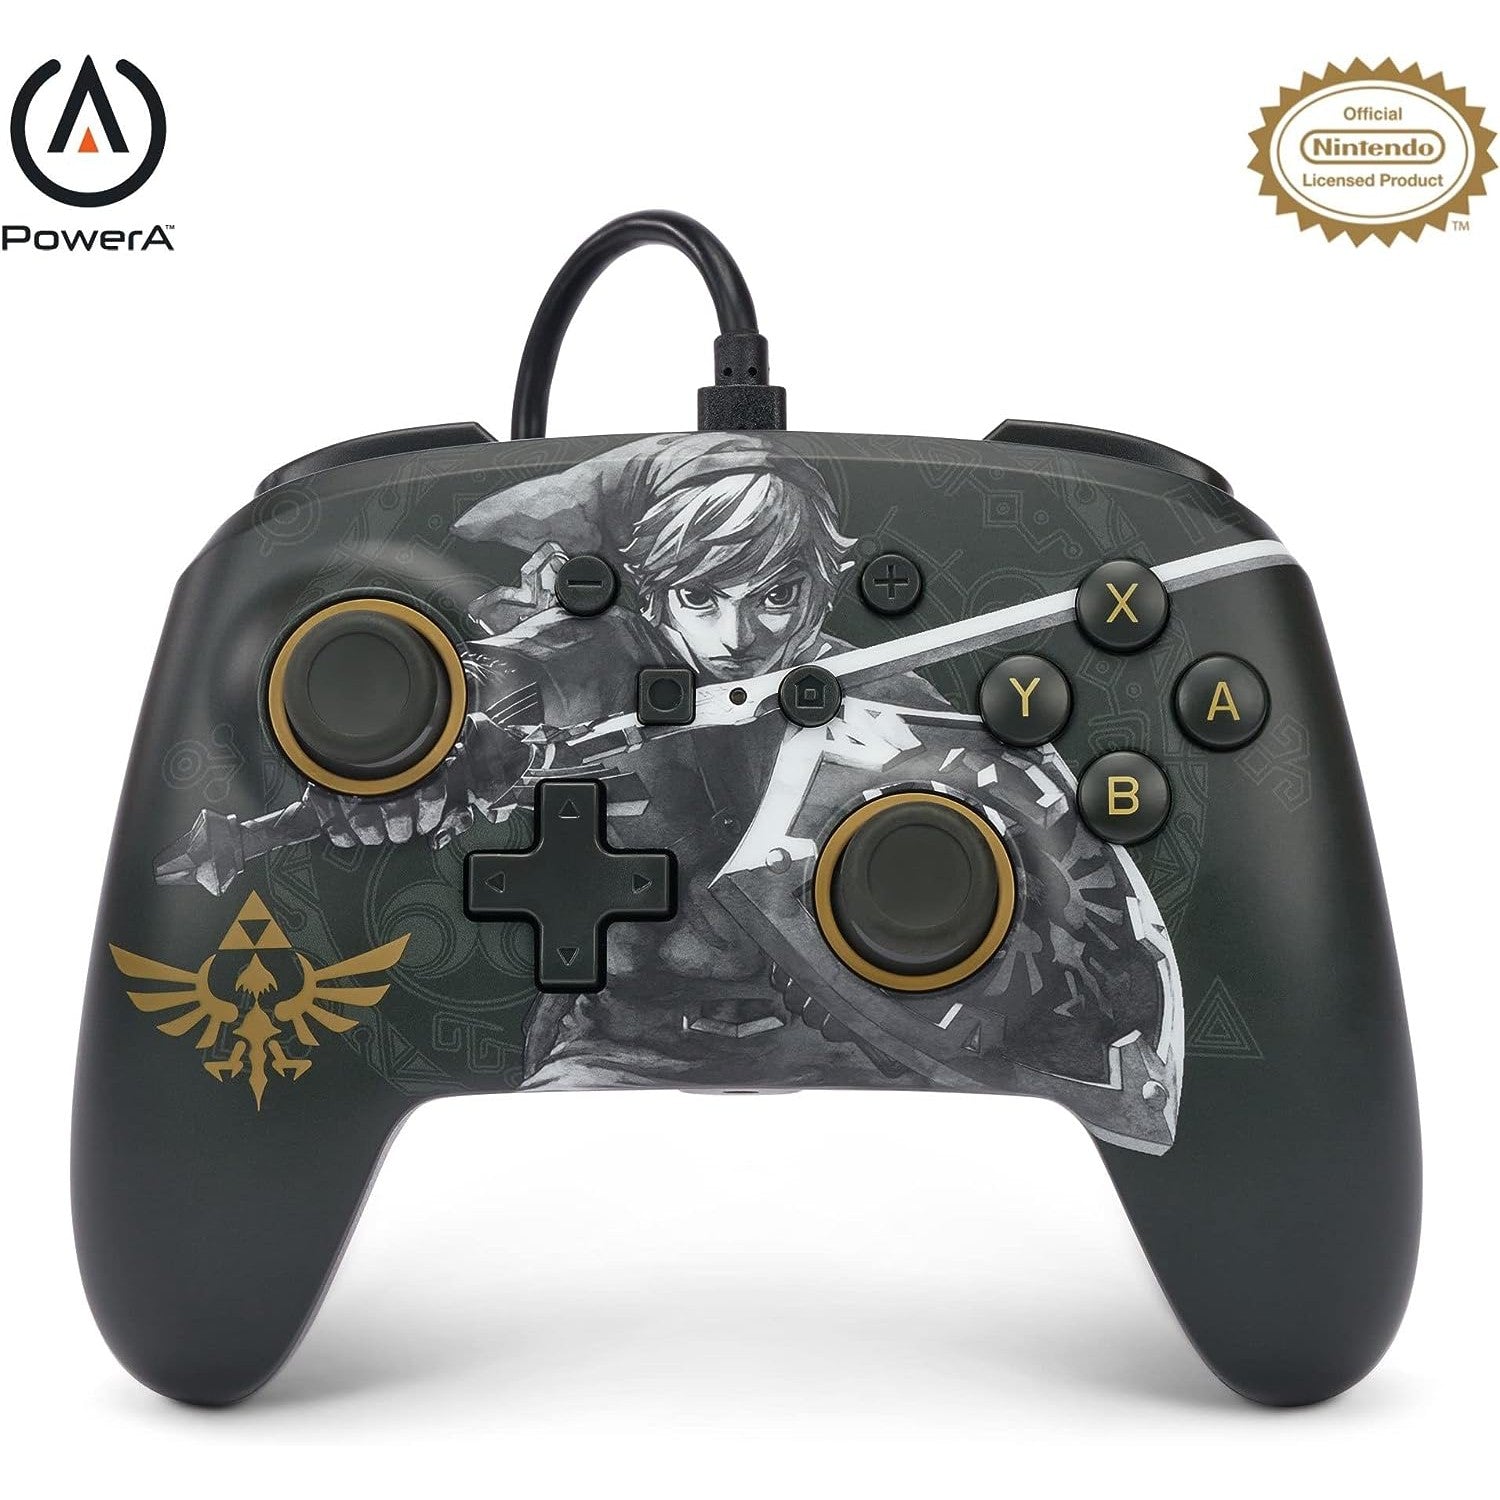 PowerA Enhanced Wired Controller for Nintendo Switch - Battle Link